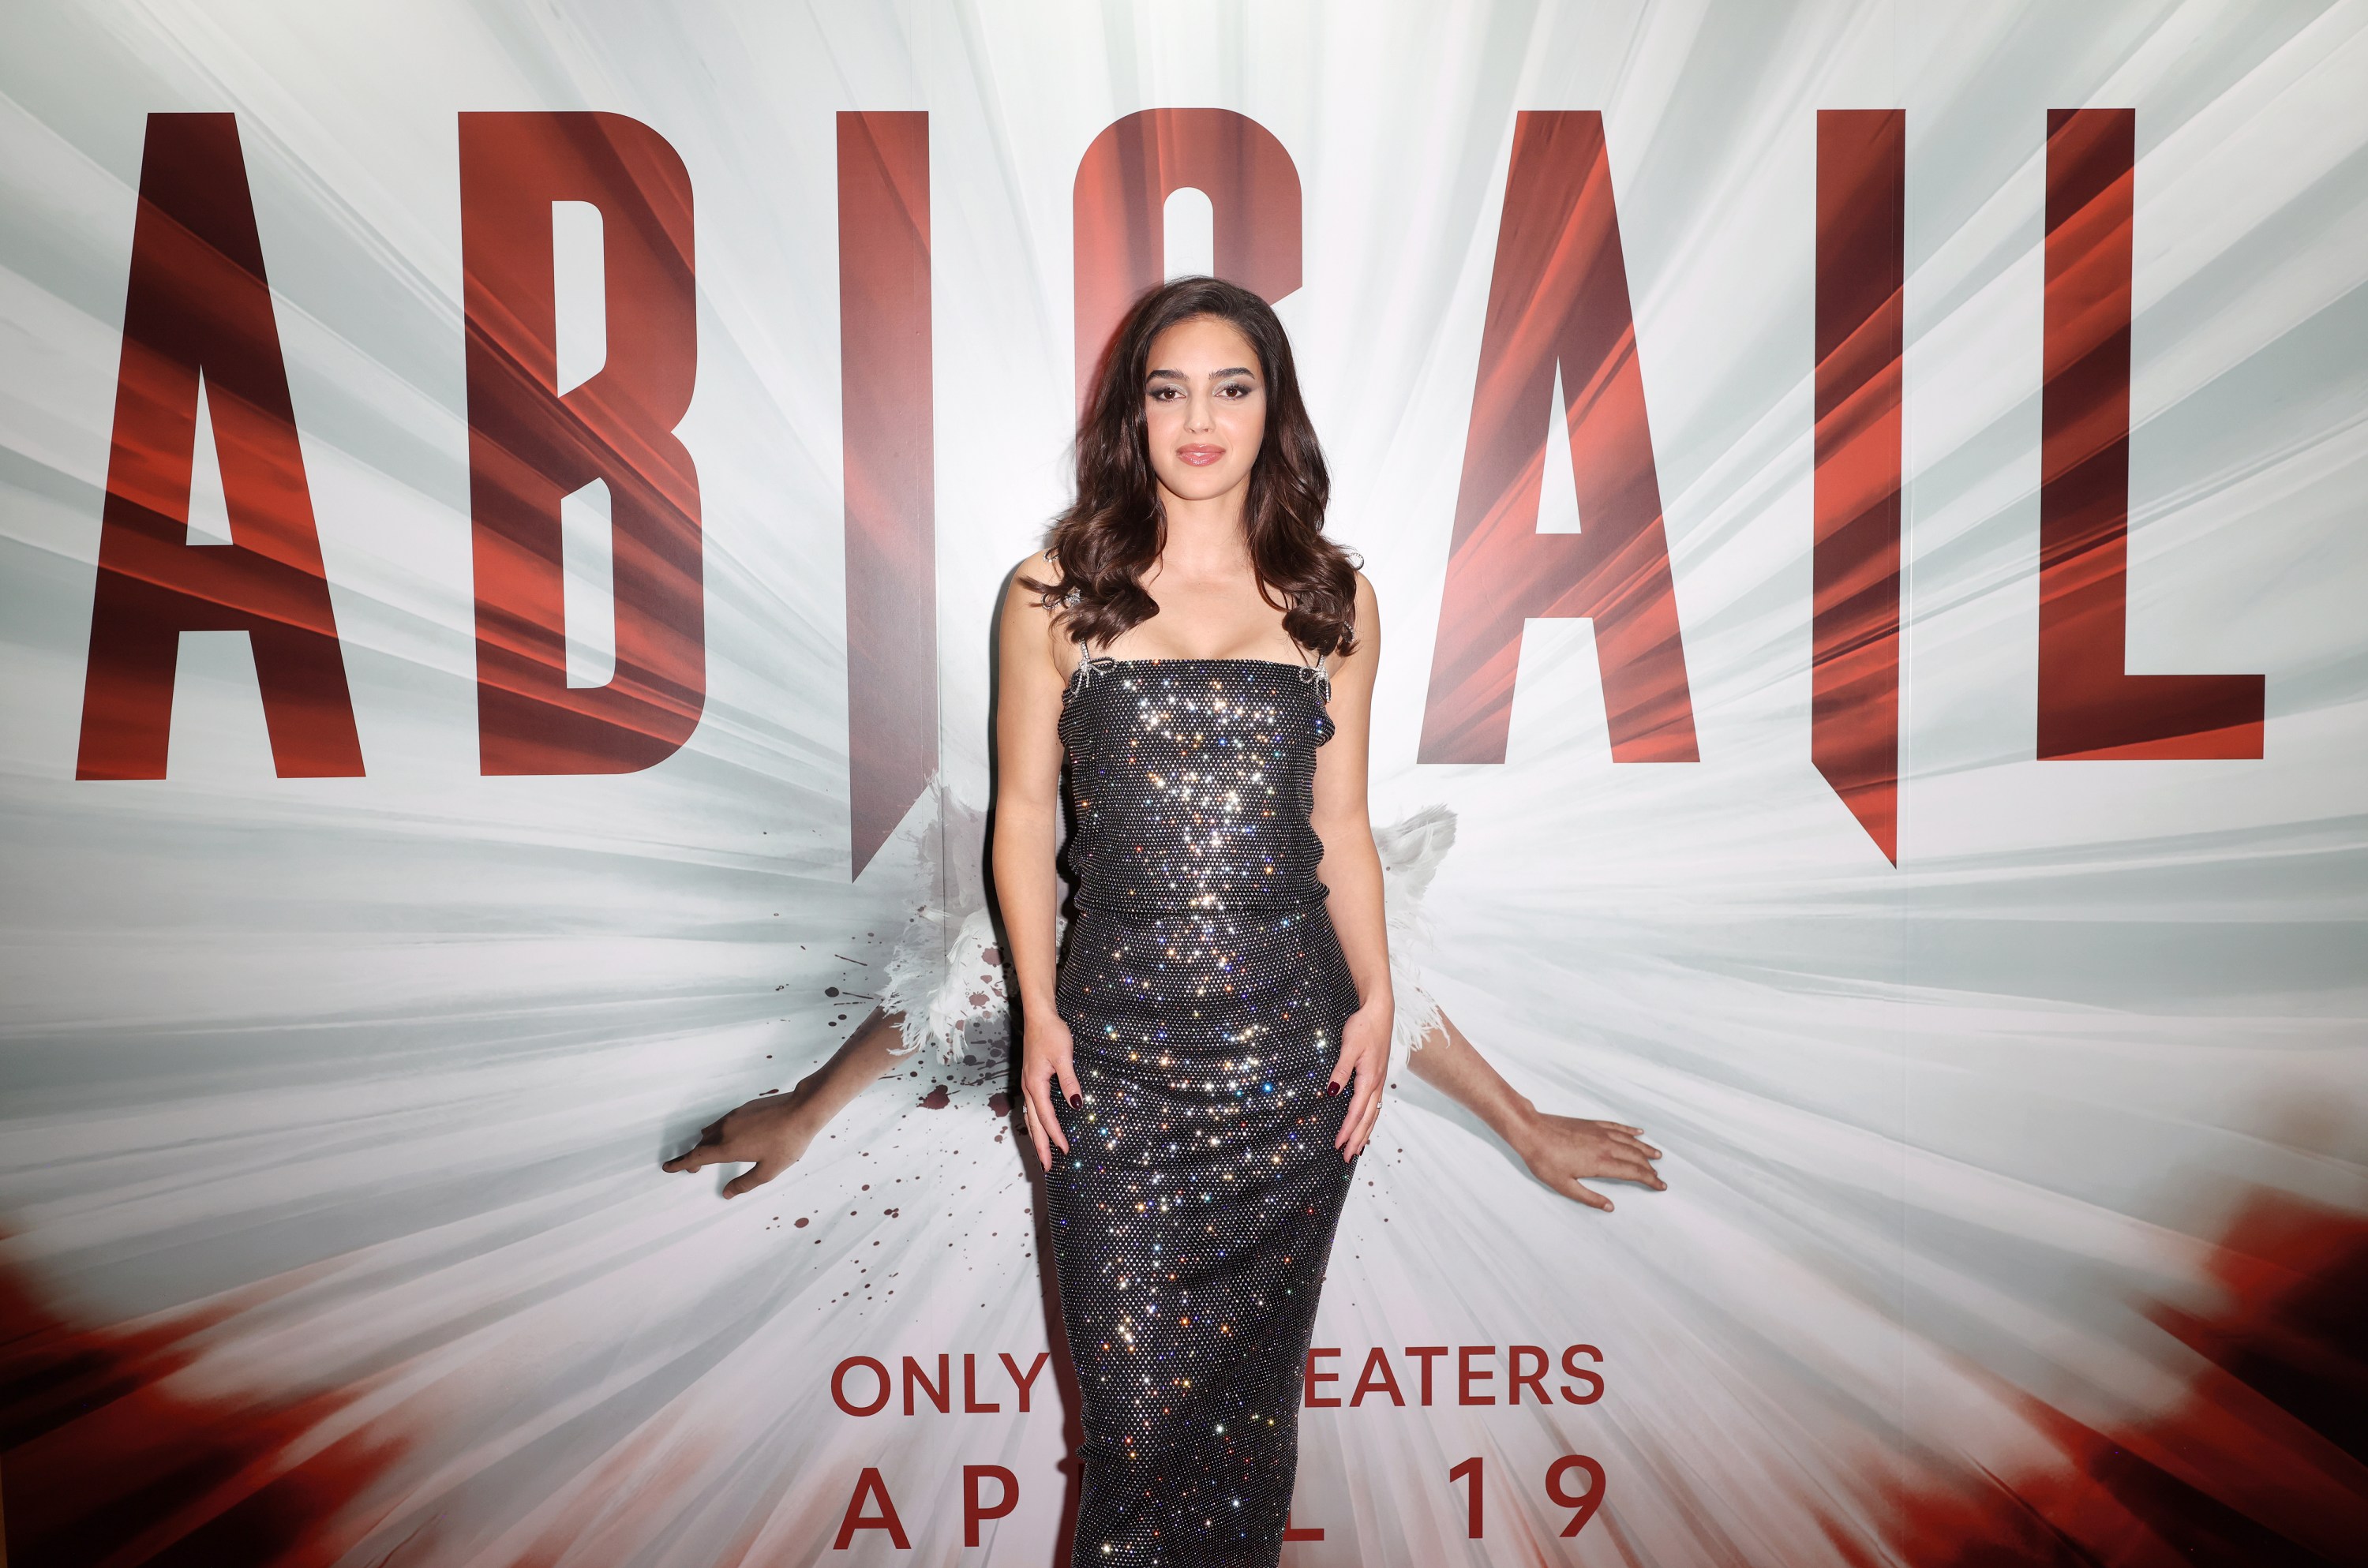 MIAMI, FLORIDA - APRIL 8: Actress Melissa Barrera is seen at the "Abigail" special screening at Silverspot Cinema - Downtown Miami on April 8, 2024 in Miami, Florida. (Photo by Alexander Tamargo/Getty Images)